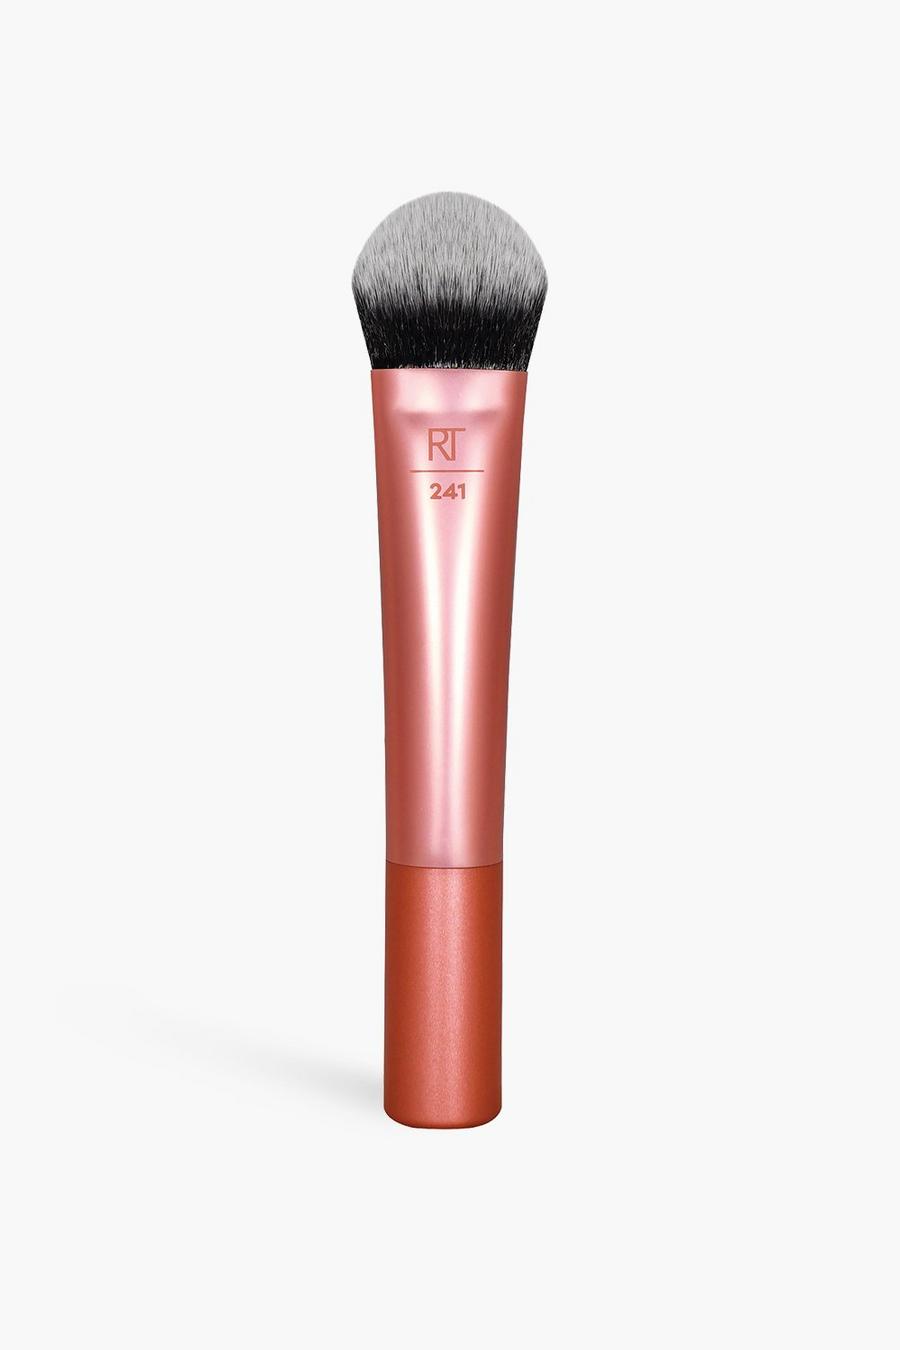 Rose gold metallic Real Techniques Complexion Brush